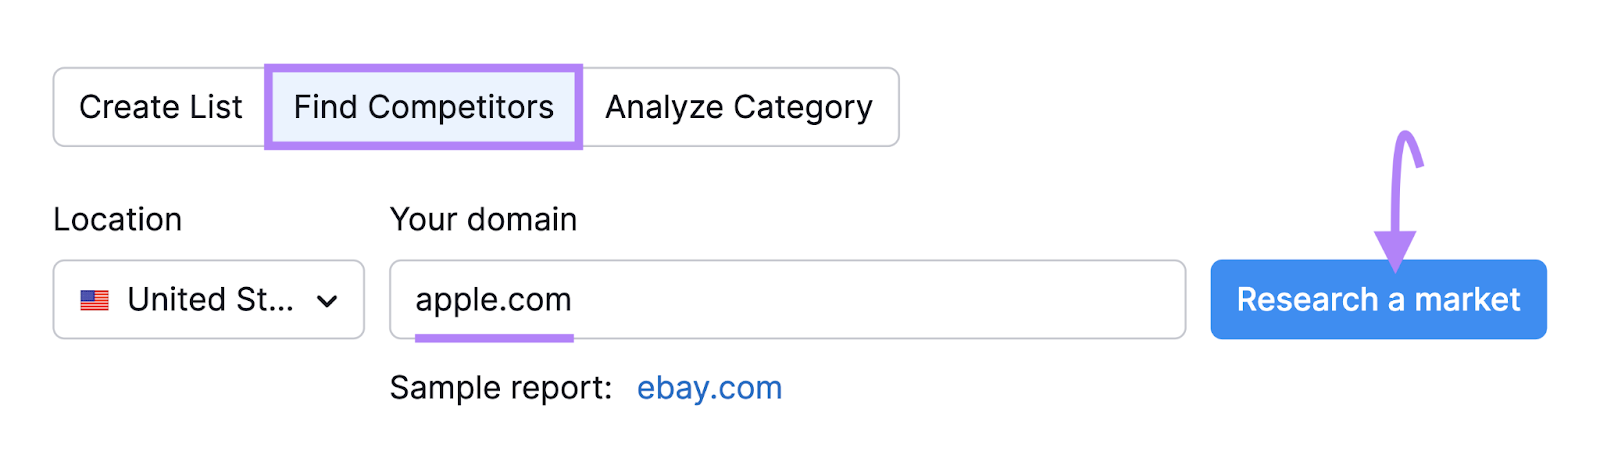 Searching for "apple.com" under "Find Competitors" option in Market Explorer tool